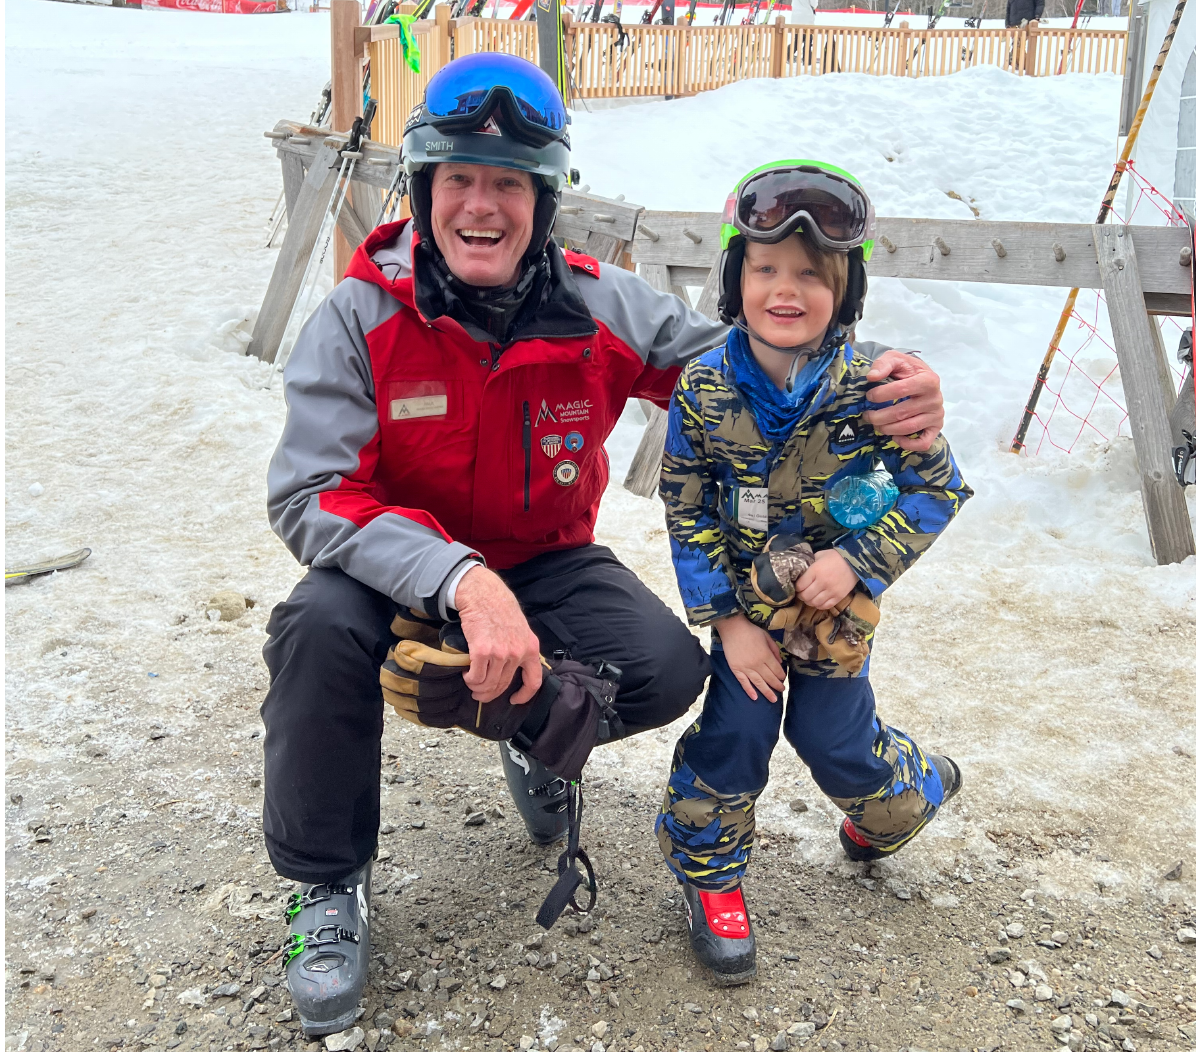 When Should I Sign My Kids Up for Ski Lessons?